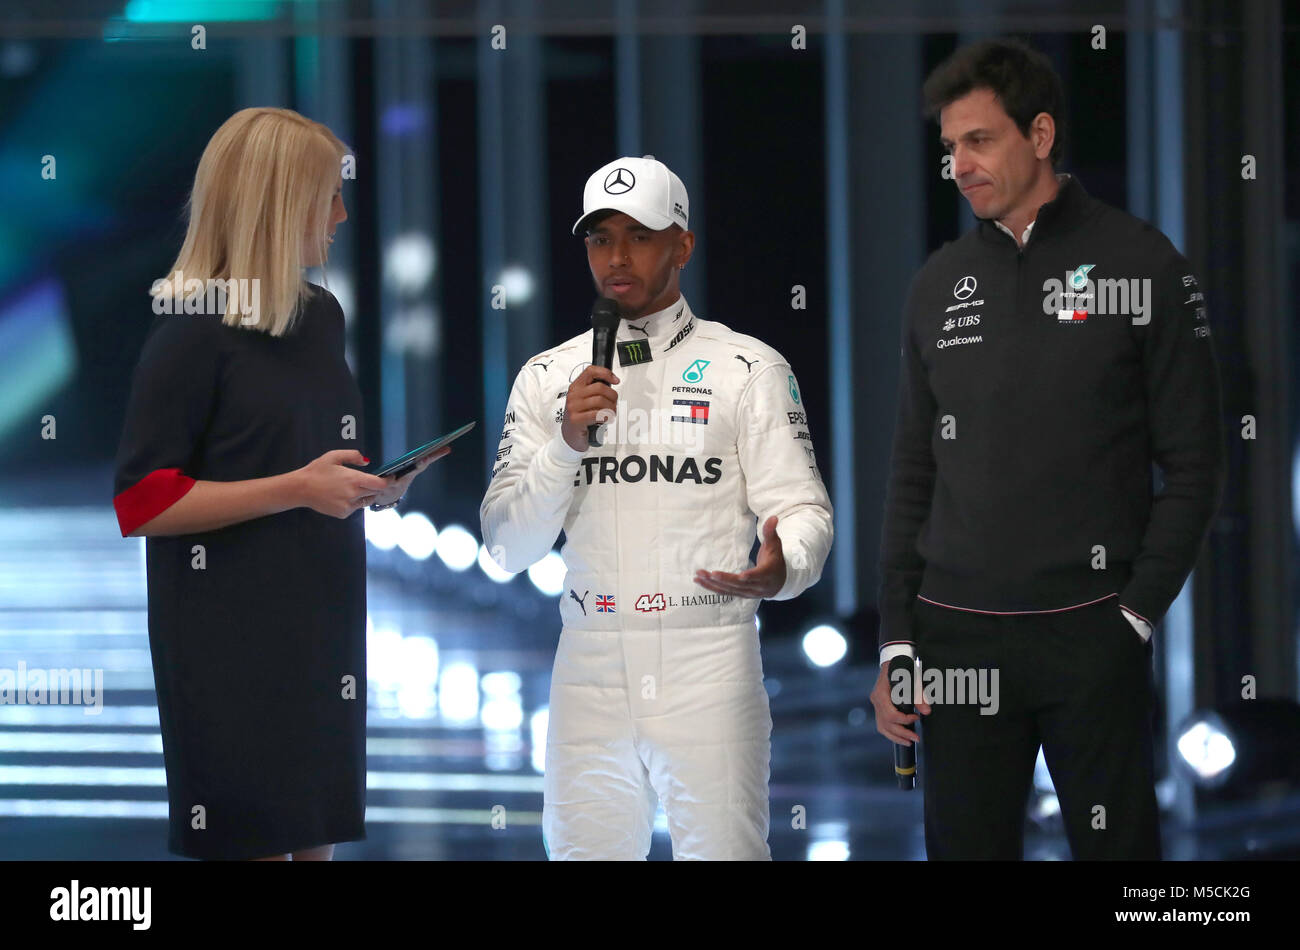 Mercedes Lewis Hamilton and team principal Toto Wolff (right) during the Mercedes-AMG F1 2018 car launch at Silverstone, Towcester. Stock Photo